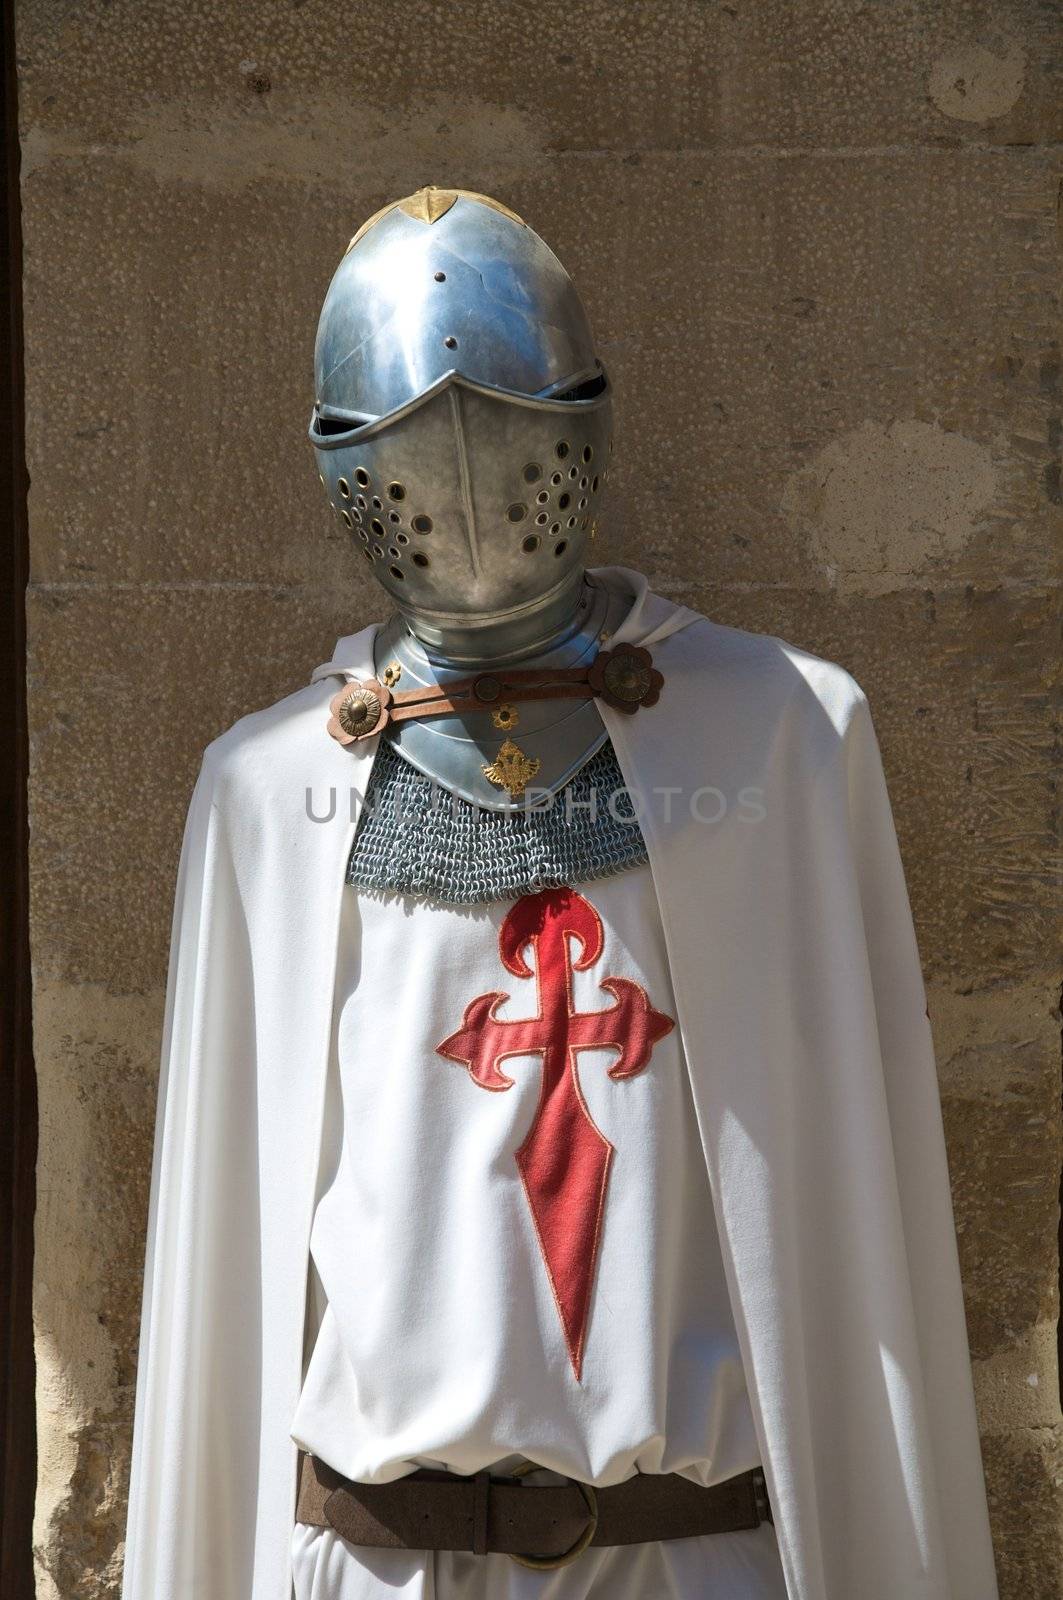 clothing of an ancient knight with helmet